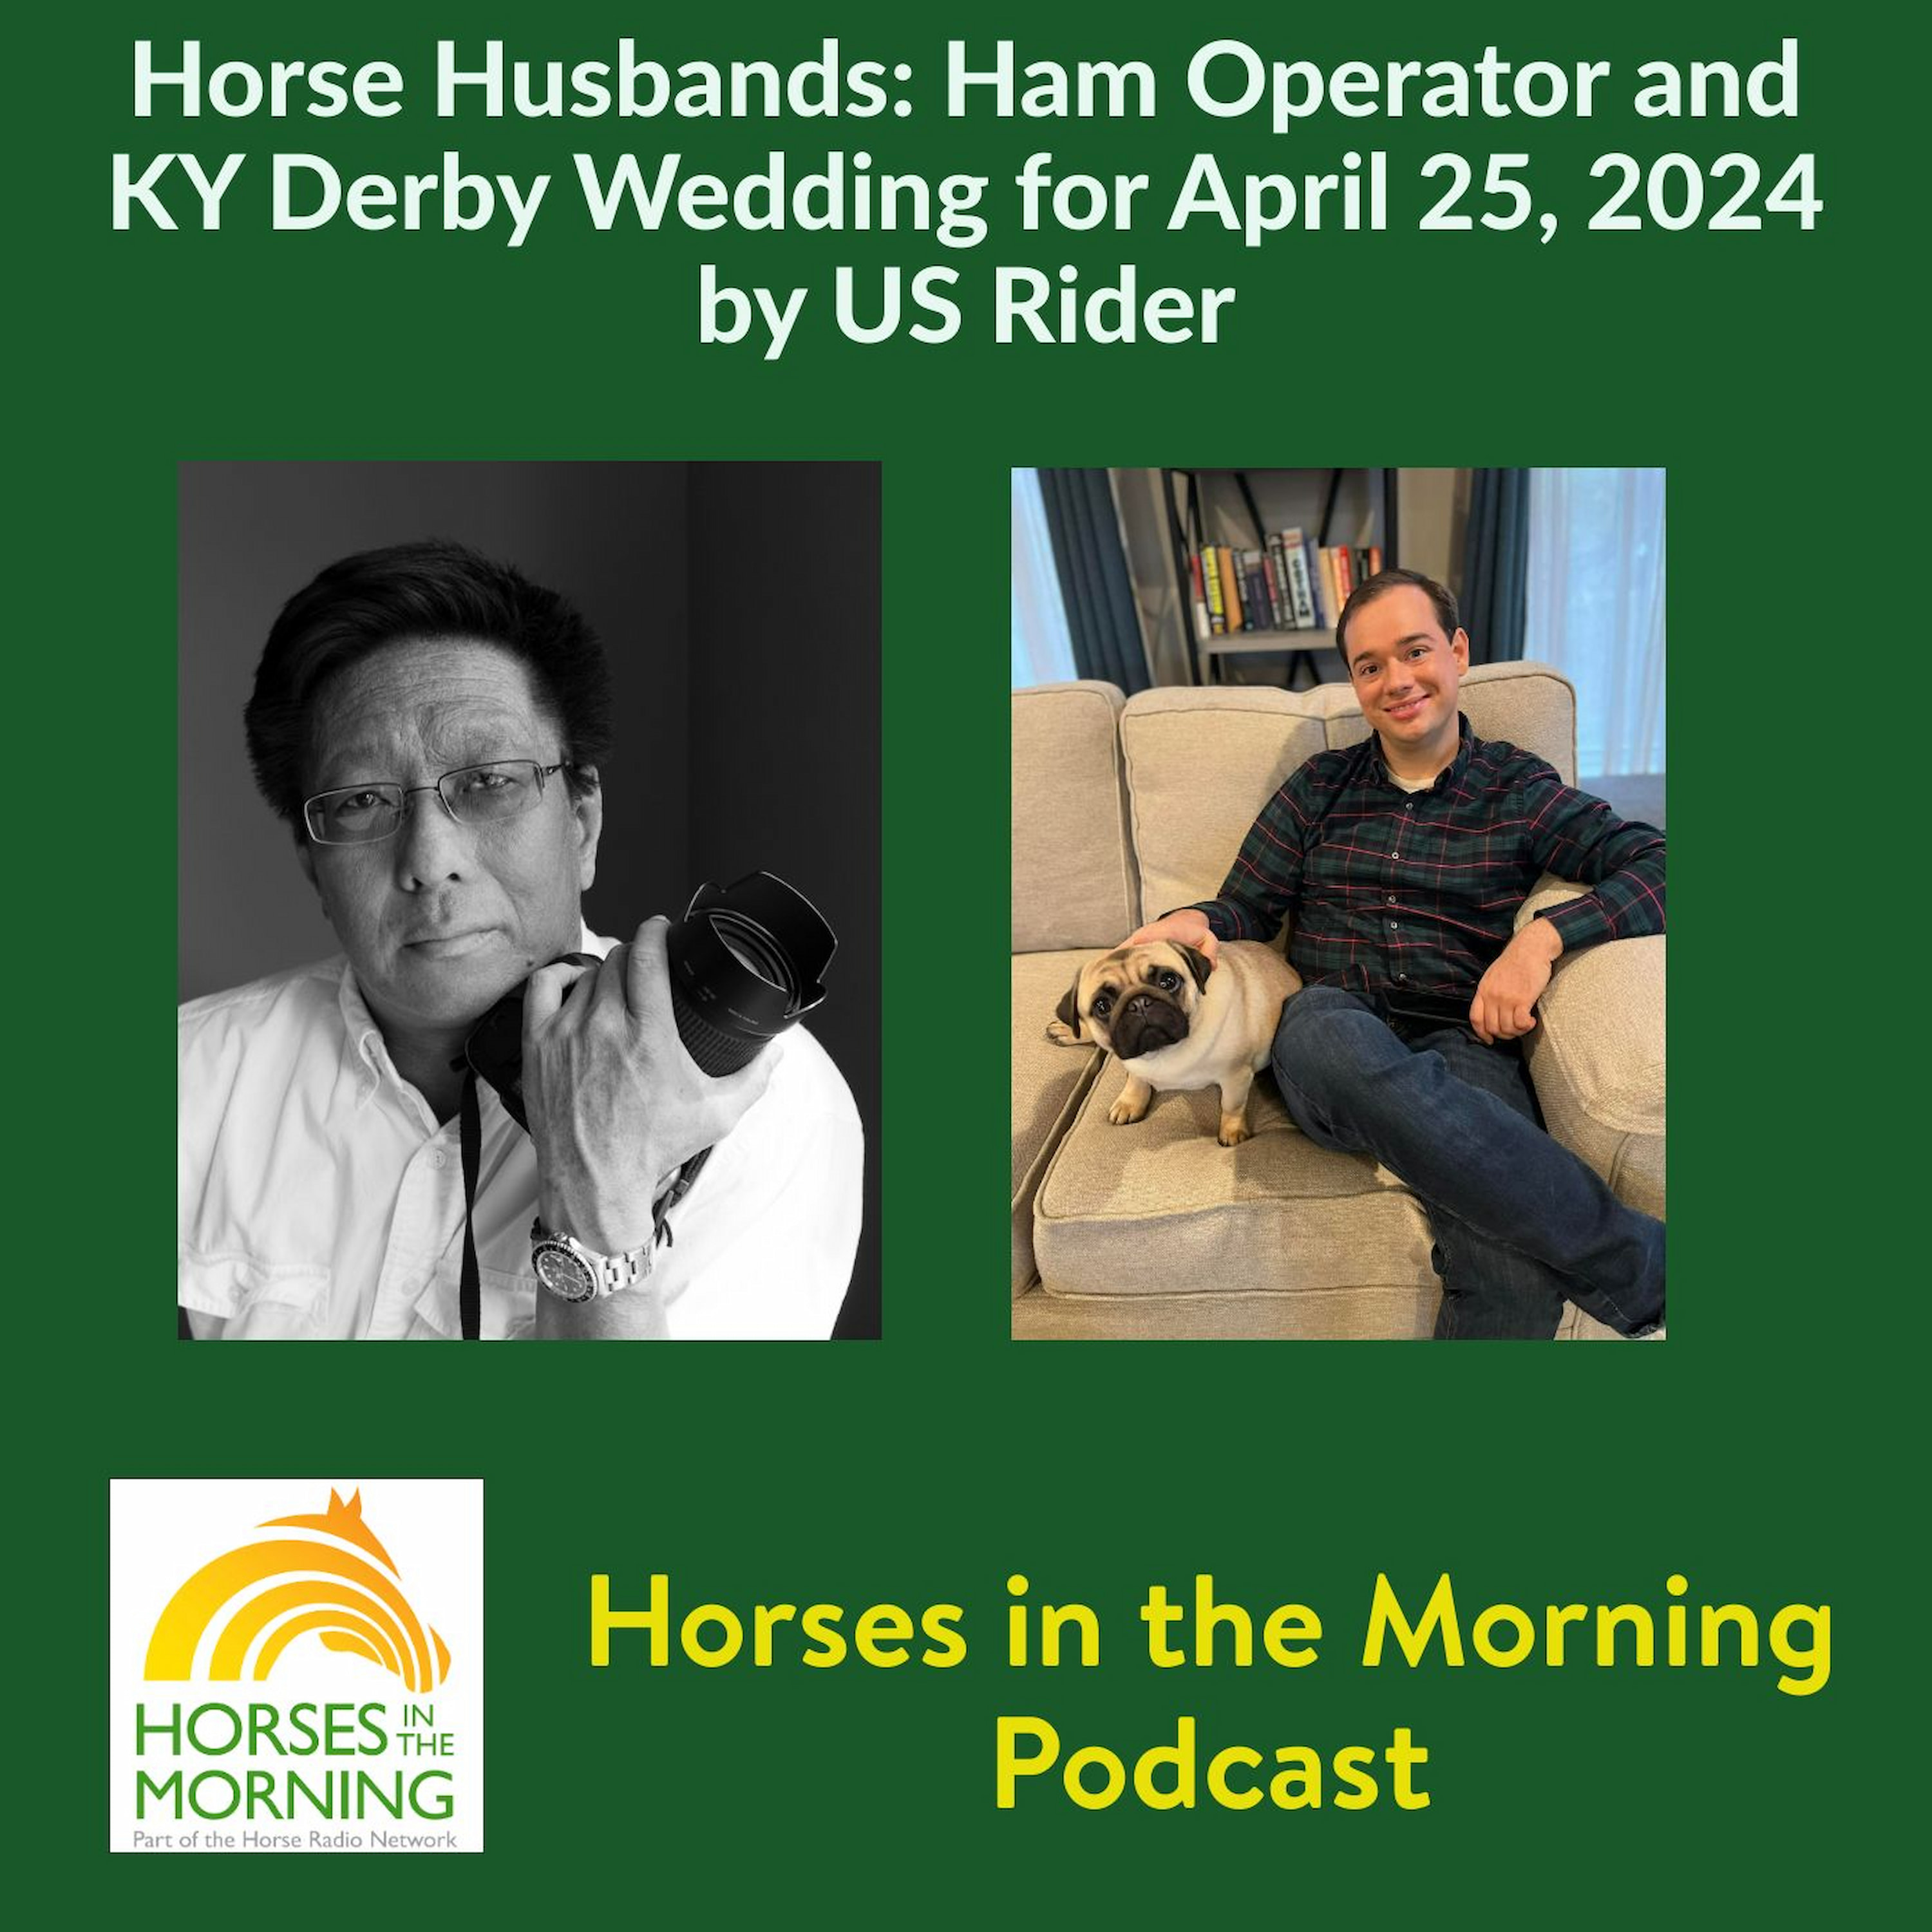 Horse Husbands: Ham Operator and KY Derby Wedding for April 25, 2024 by US Rider